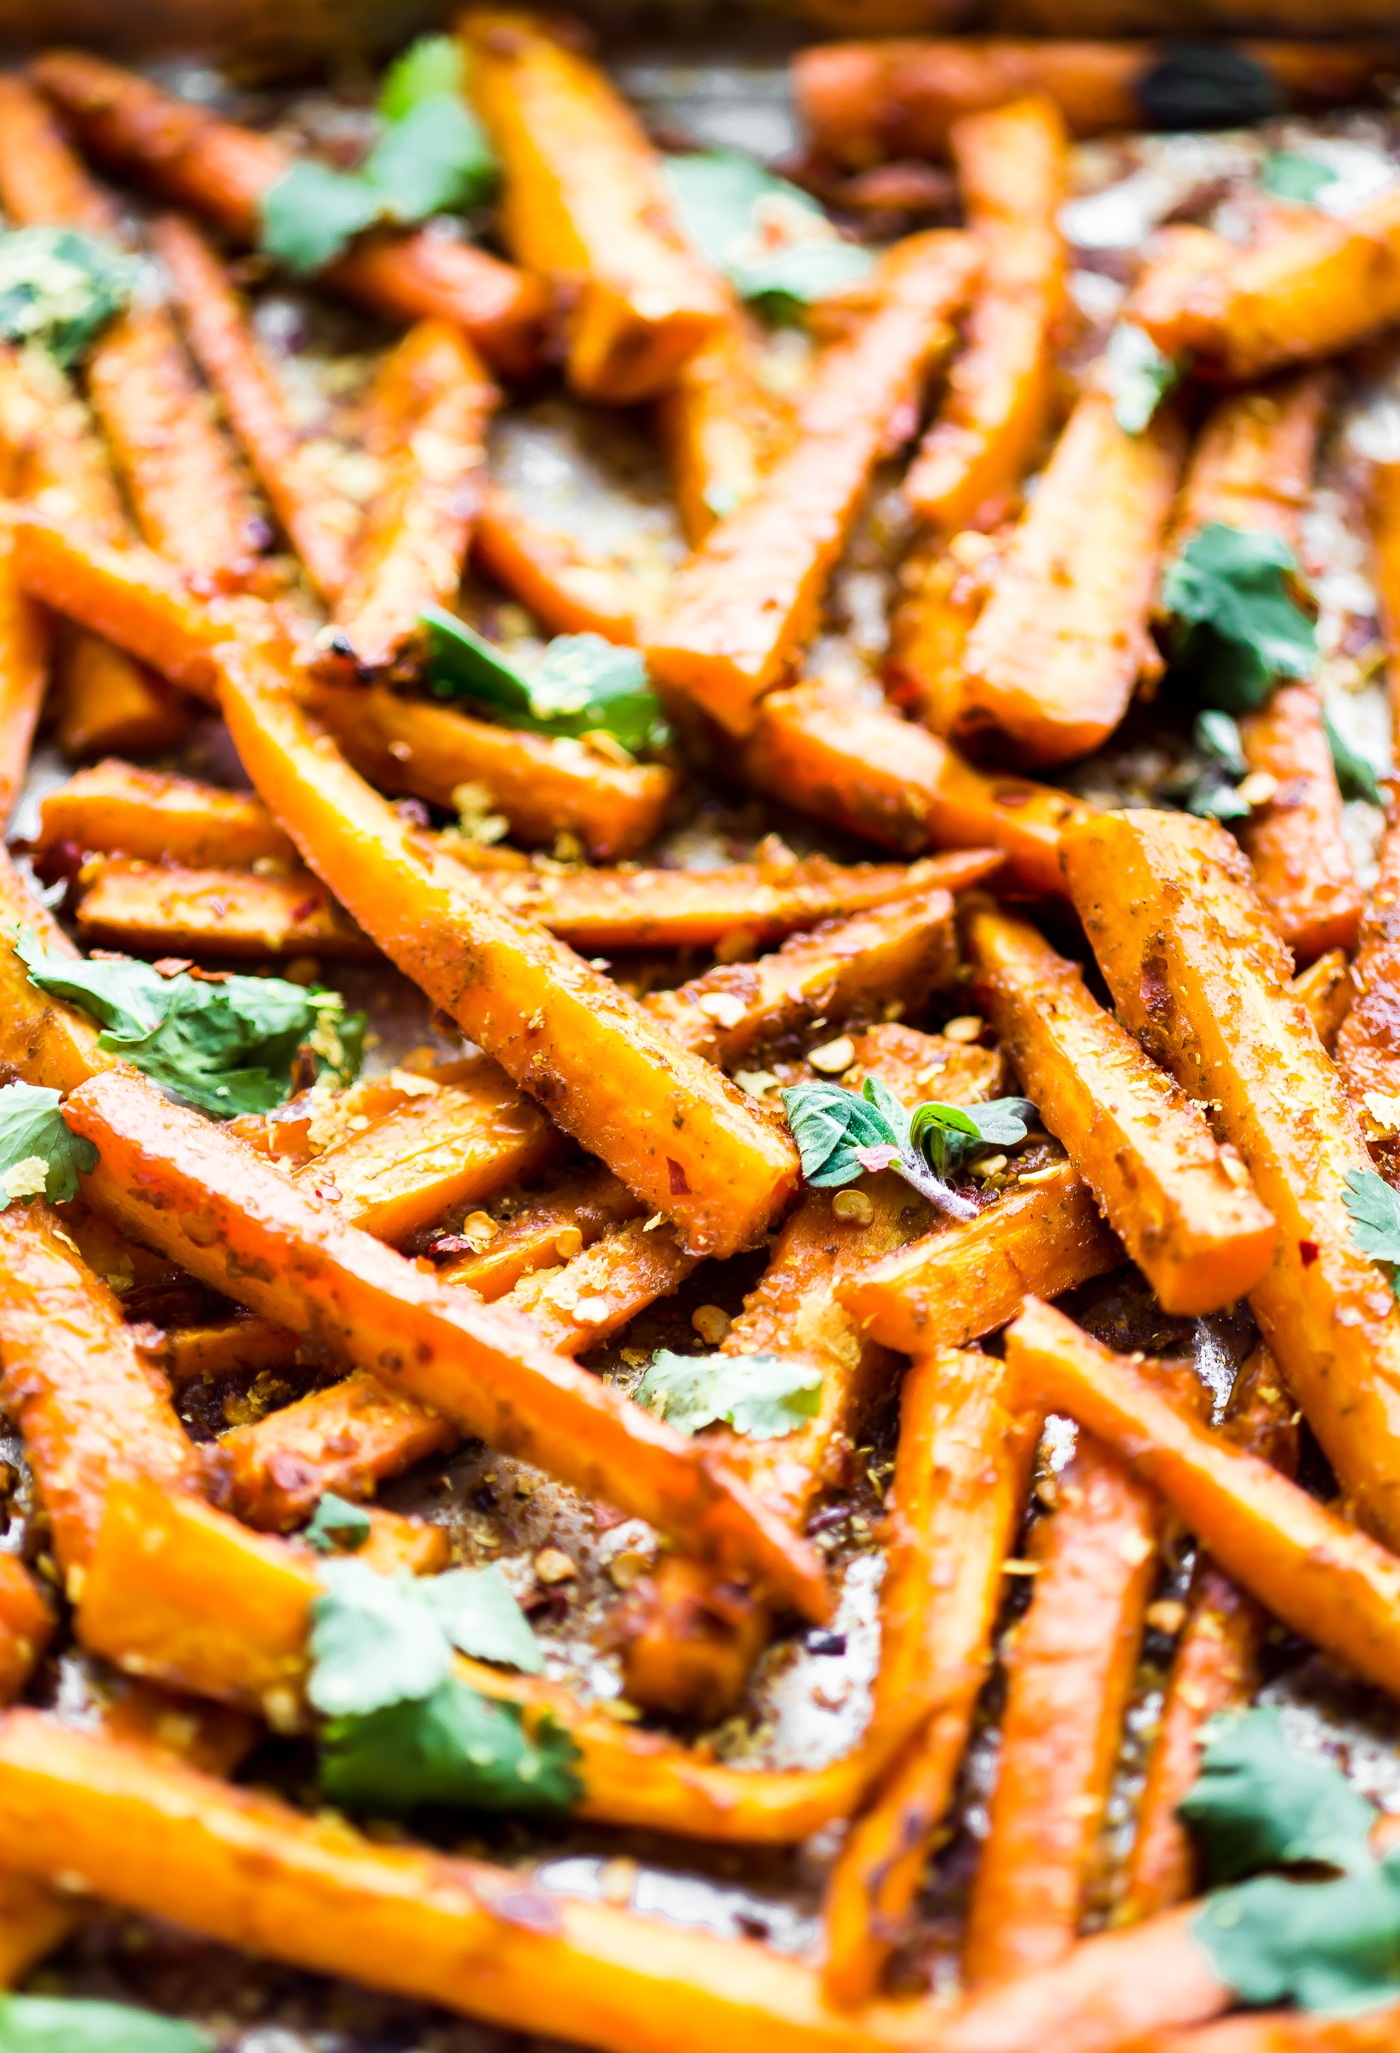 These Peri Peri oven baked carrot fries are gonna knock your socks off ya'll! The homemade Peri Peri Sauce is the key to making these carrot fries more flavorful. Just marinate slice carrots in the sauce, bake, and enjoy! A paleo, vegan, and whole 30 friendly snack with a kick of spice.